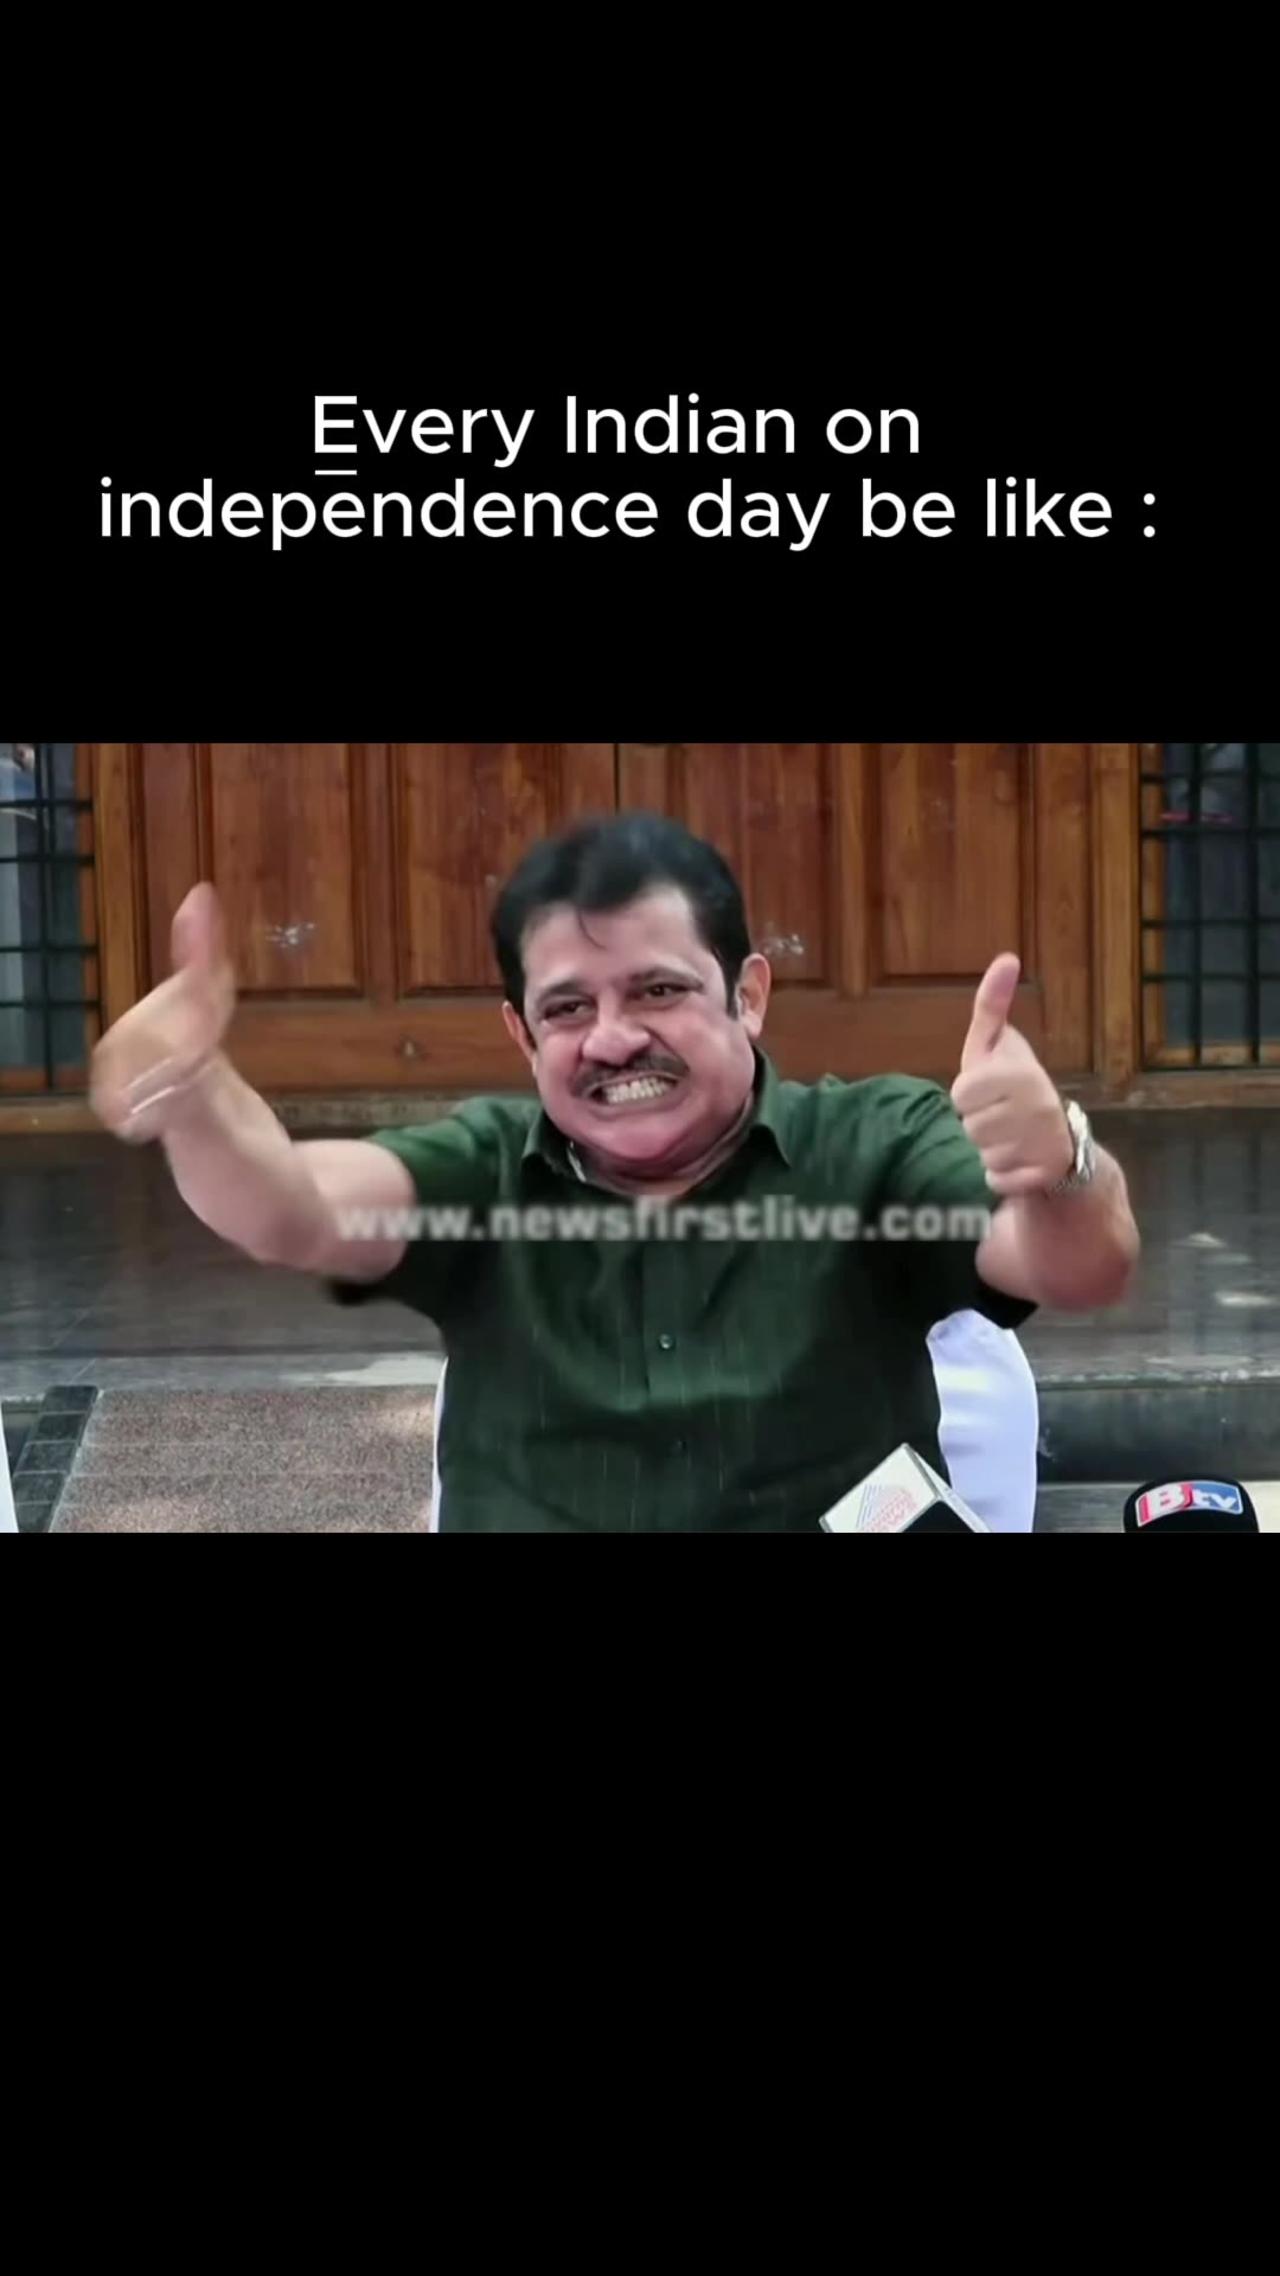 independence day in india meme